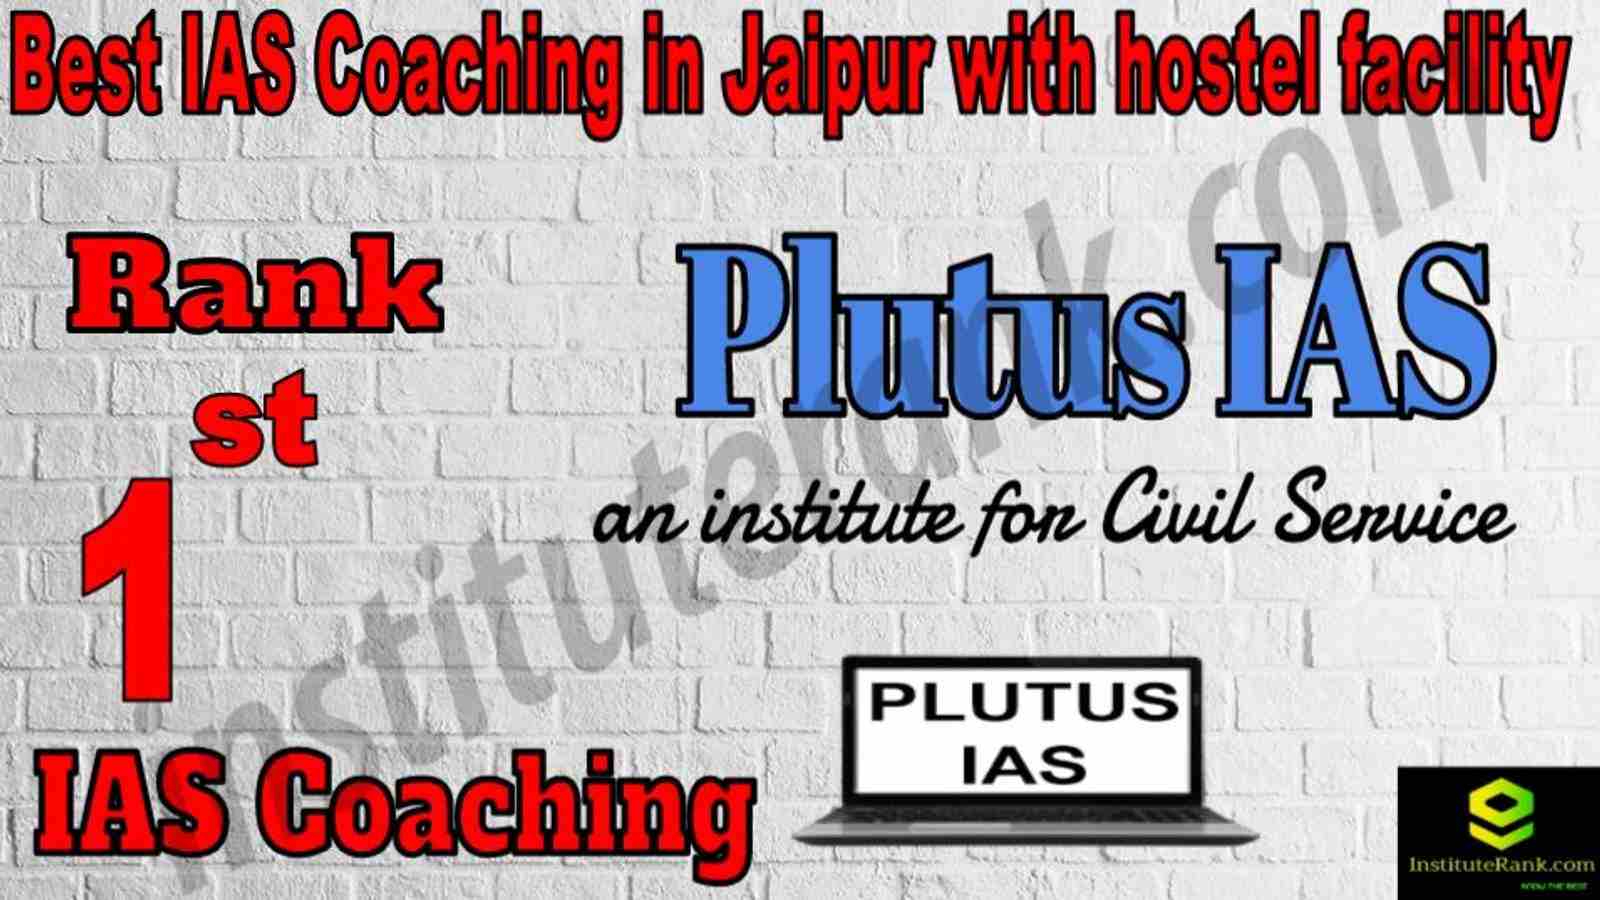 1st Best IAS Coaching in Jaipur with hostel facility